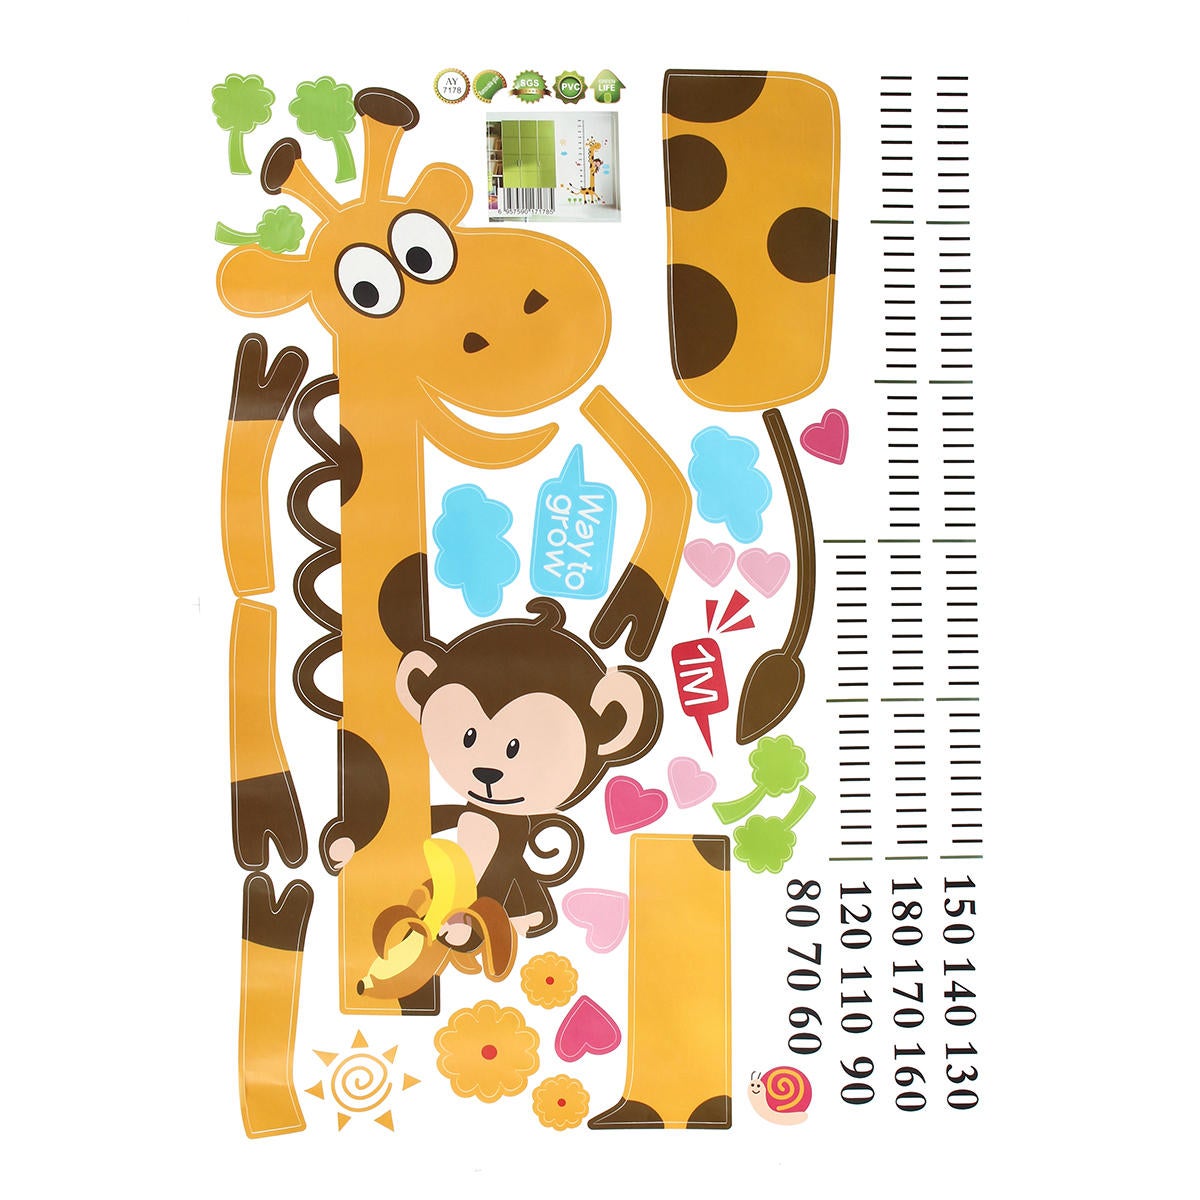 2PC Removable Height Chart Measure Wall Sticker Giraffe Decal for Kids Baby Room